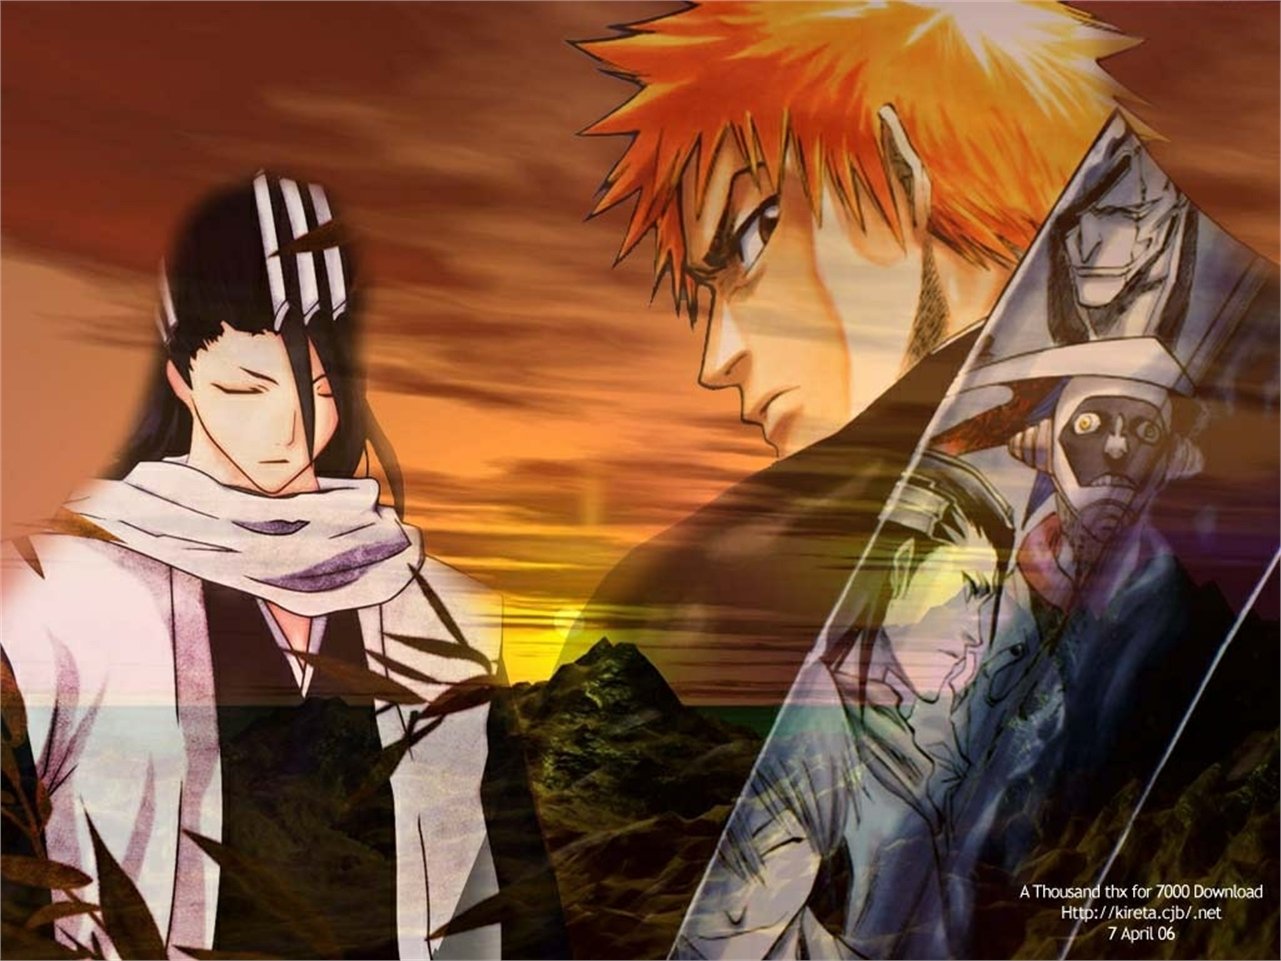 Bleach Image - ID: 450360 - Image Abyss